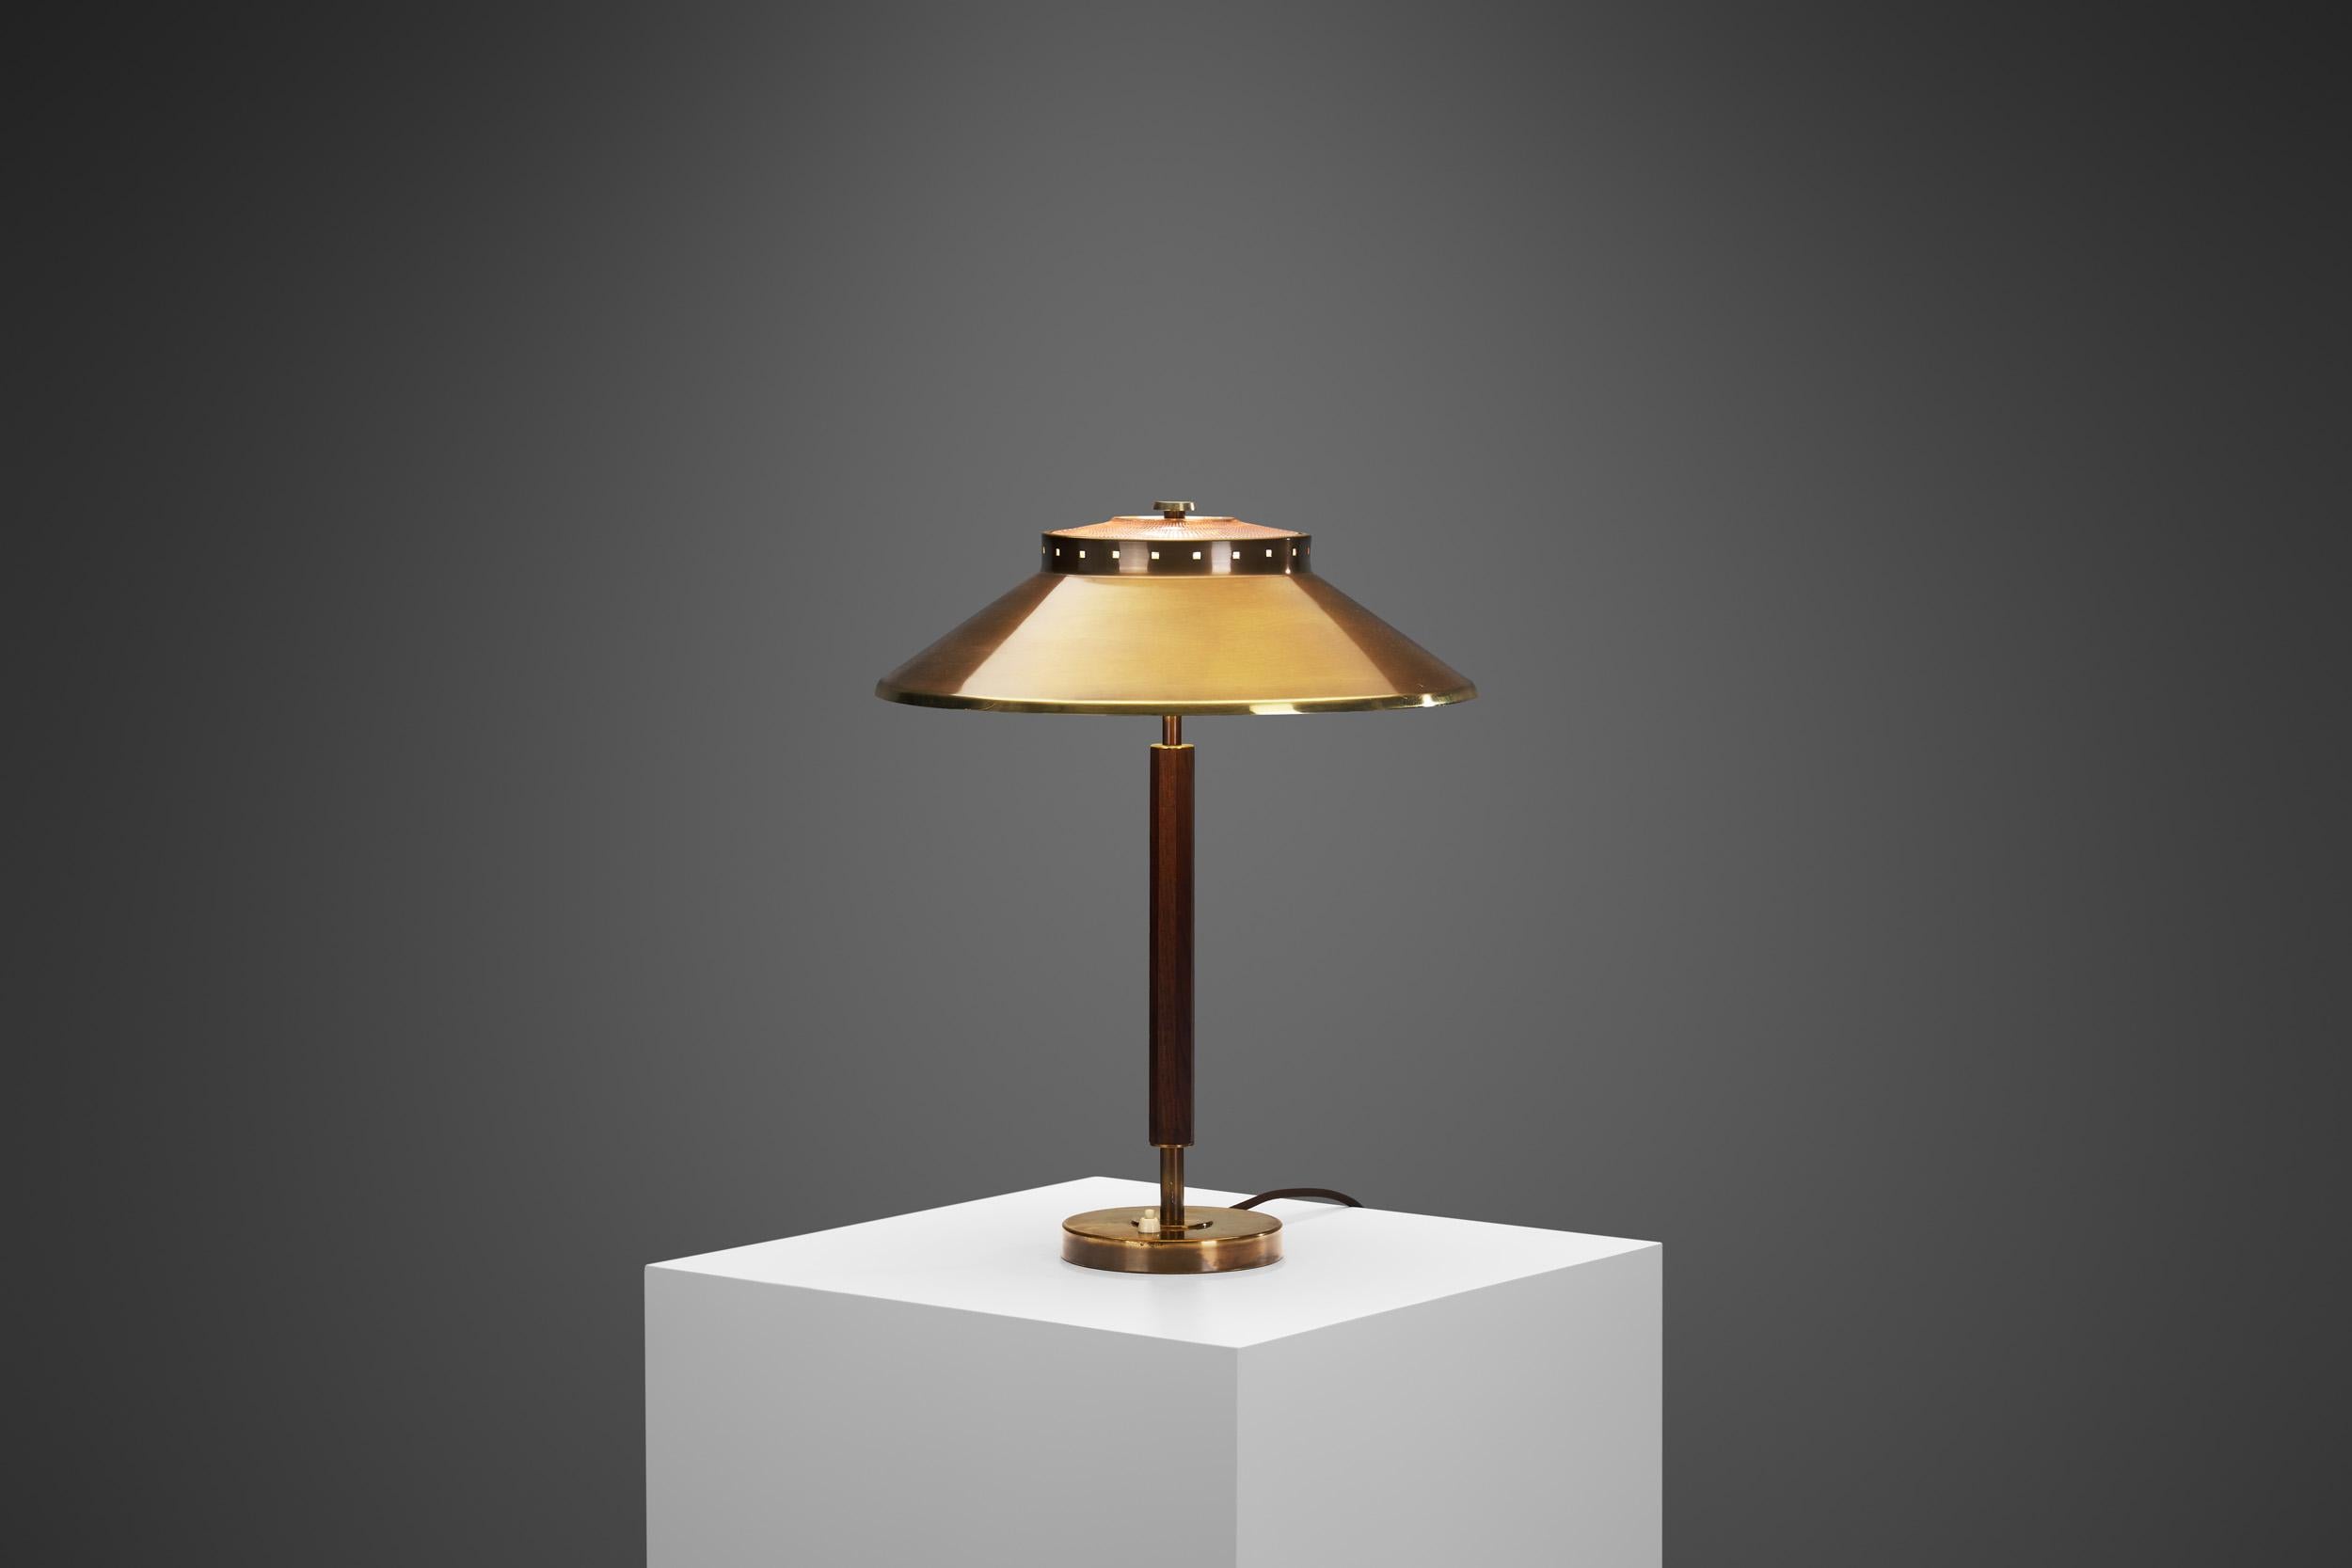 Characterized by clean lines, quality woods, soft edges and intuitive functionality, the Swedish Modern lighting models of Boréns Borås are eternally timeless and timely. This specific table lamp model is a delightfully distinctive piece, with